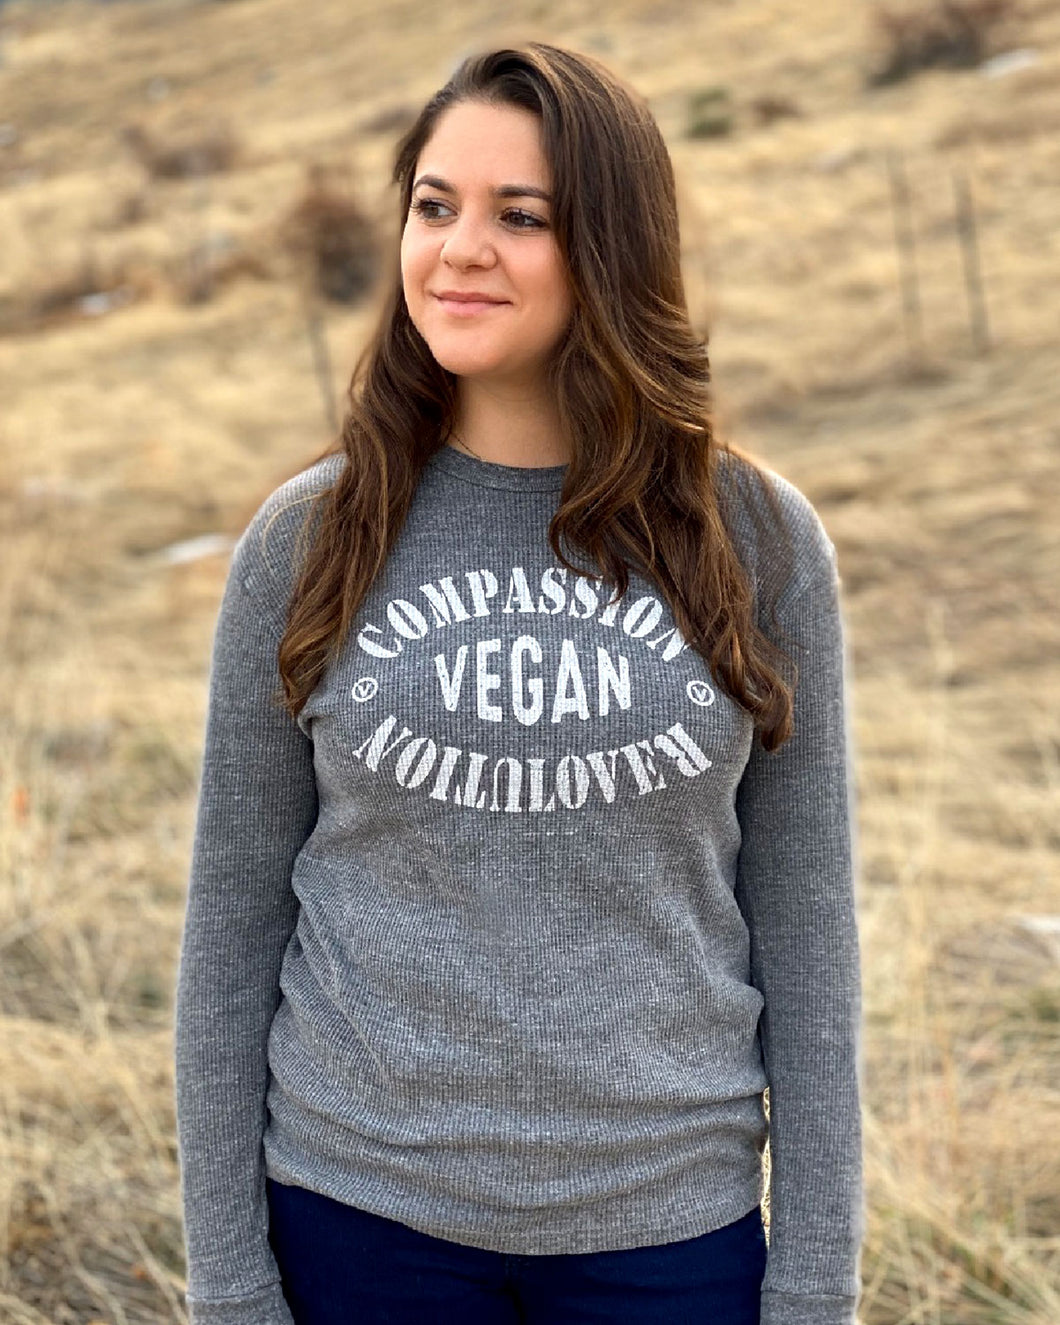 Compassion Revolution - Long Sleeve Unisex Thermal Shirt